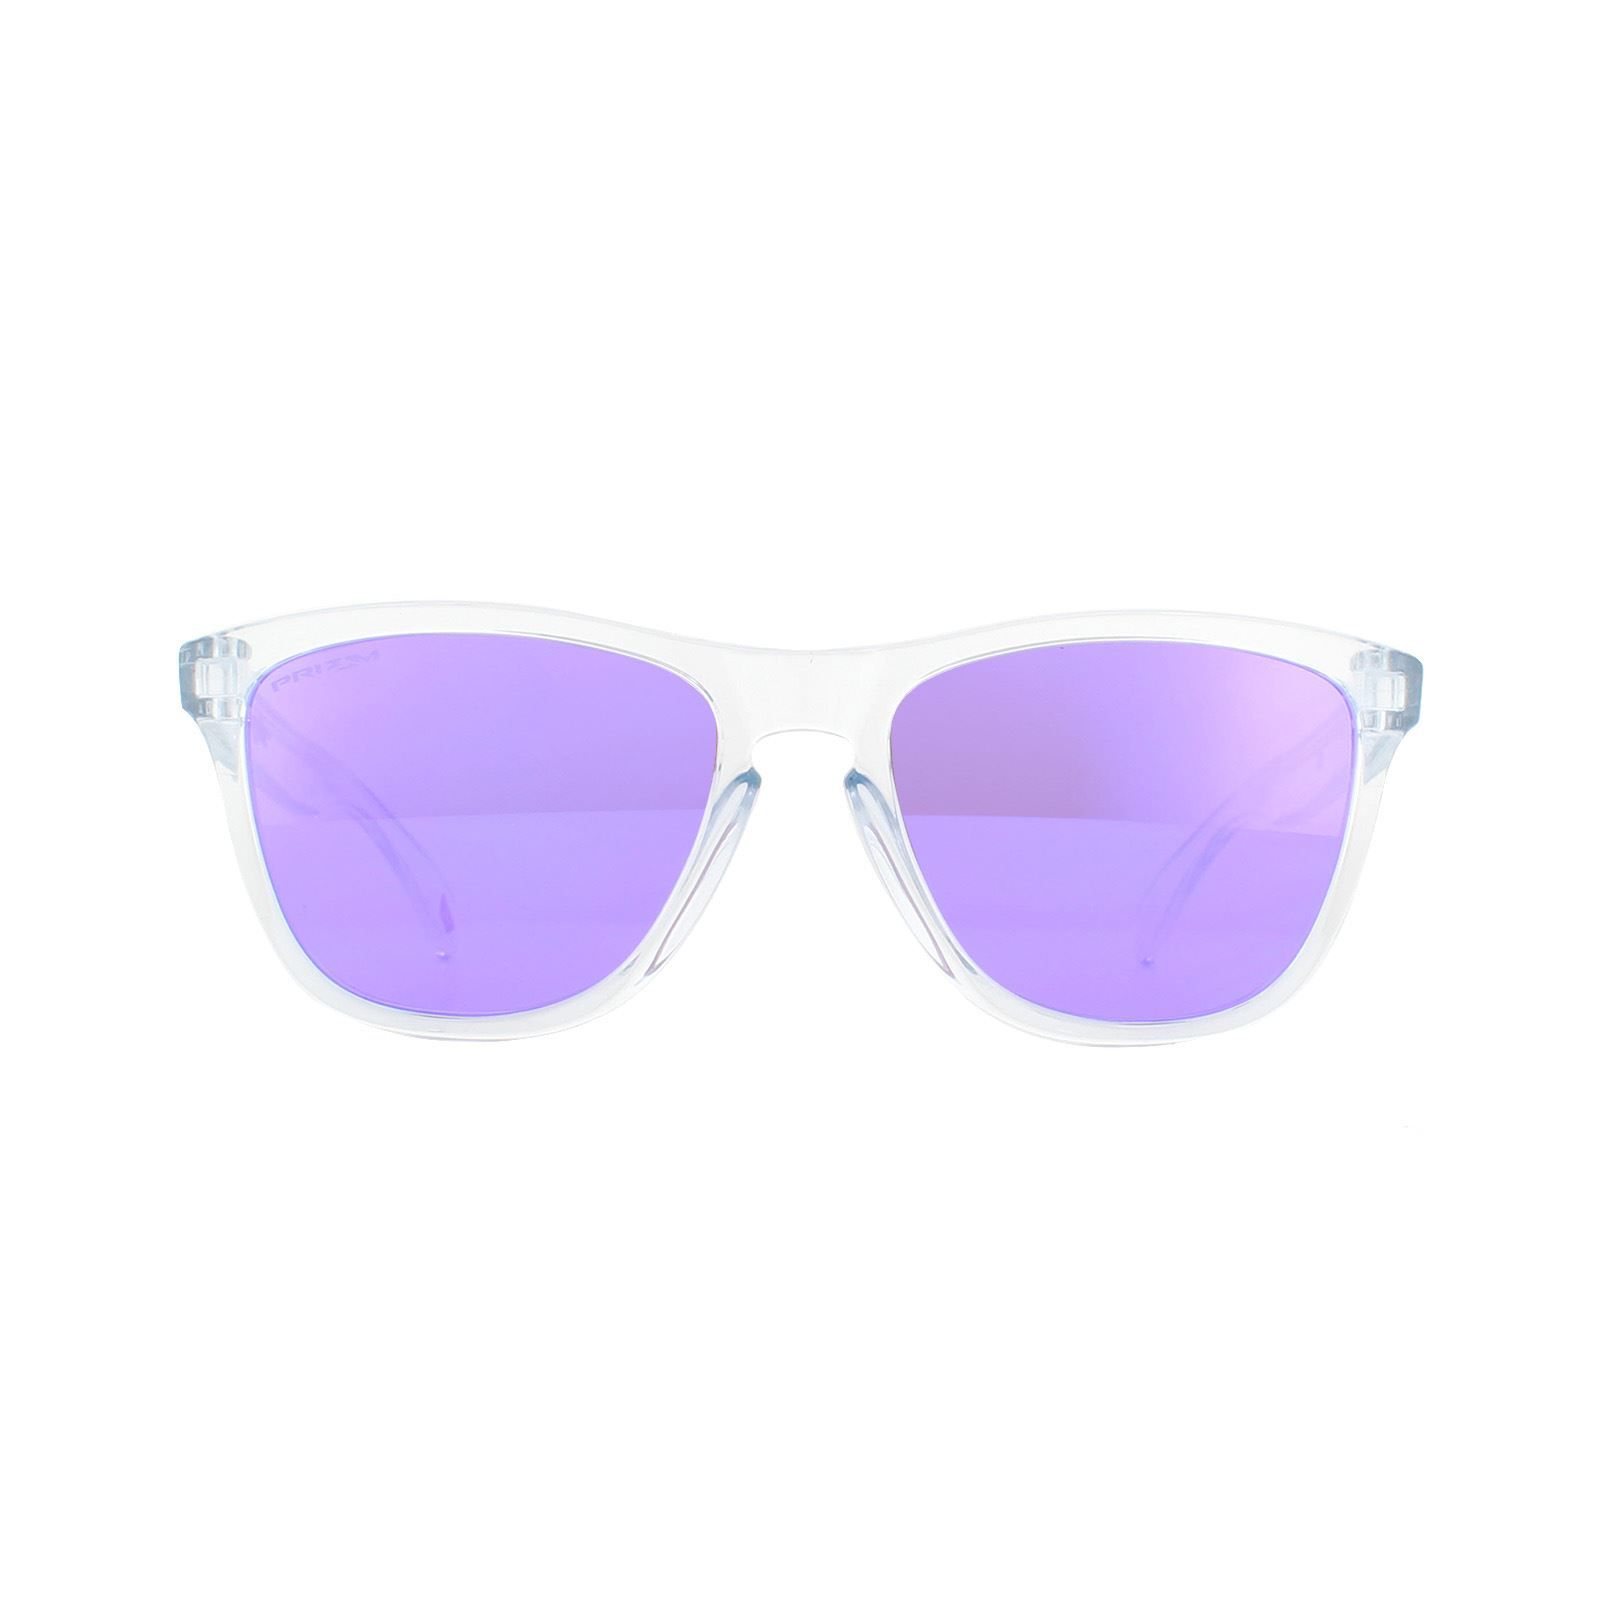 Oakley Sunglasses Frogskins OO9013-H7 Polished Clear Prizm Violet a re-run of the very first Oakley dual-lens sunglass the Frogskins are limited edition specials that are in high demand and often collectors models. Unusual colours and funky combinations make these much sought after.